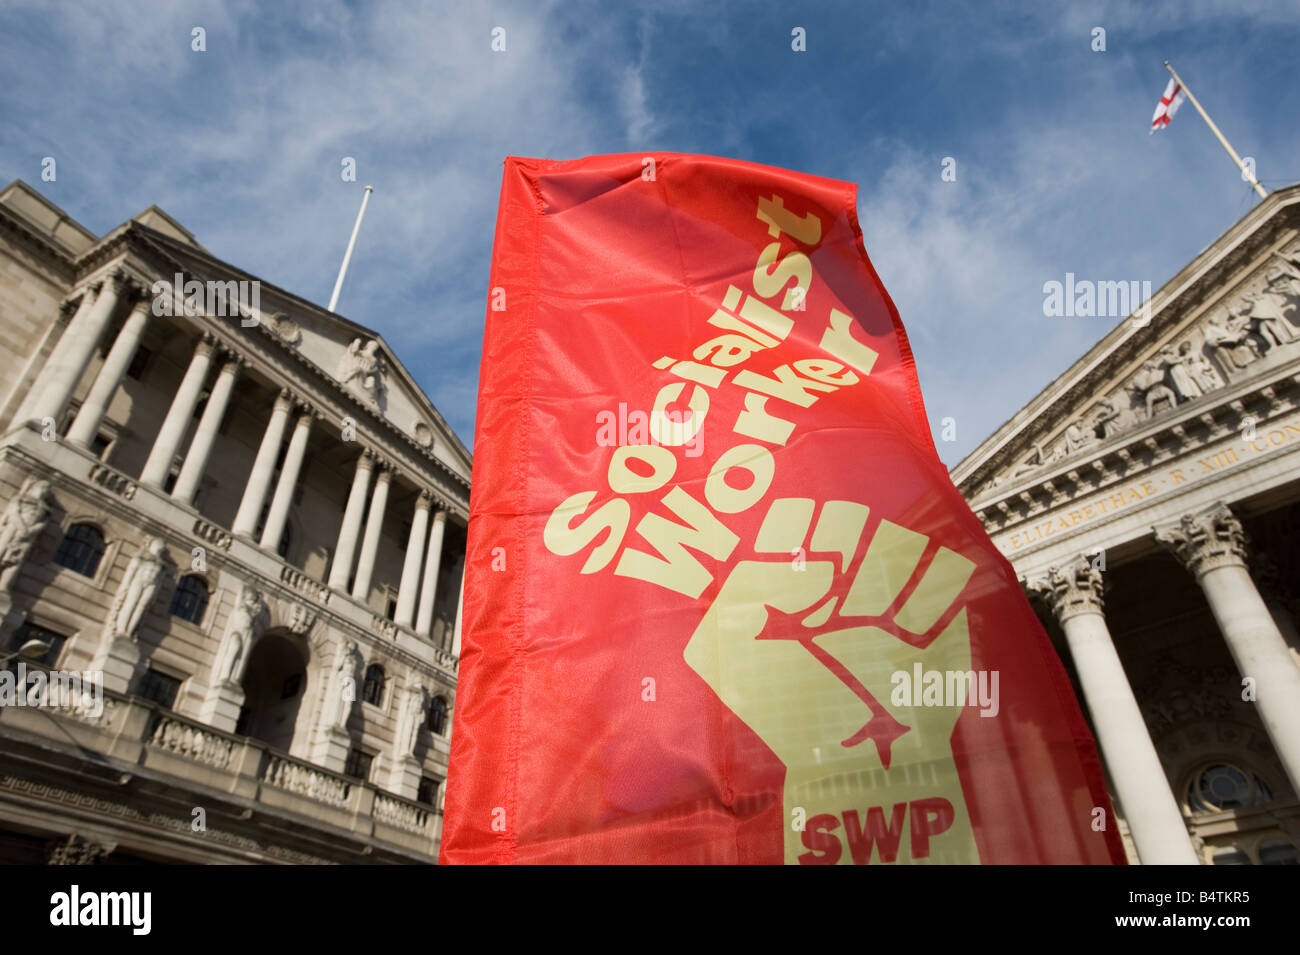 'Socialist Workers Party' demonstrating in the City of London against government bailing out banks Oct 2008 London UK Stock Photo